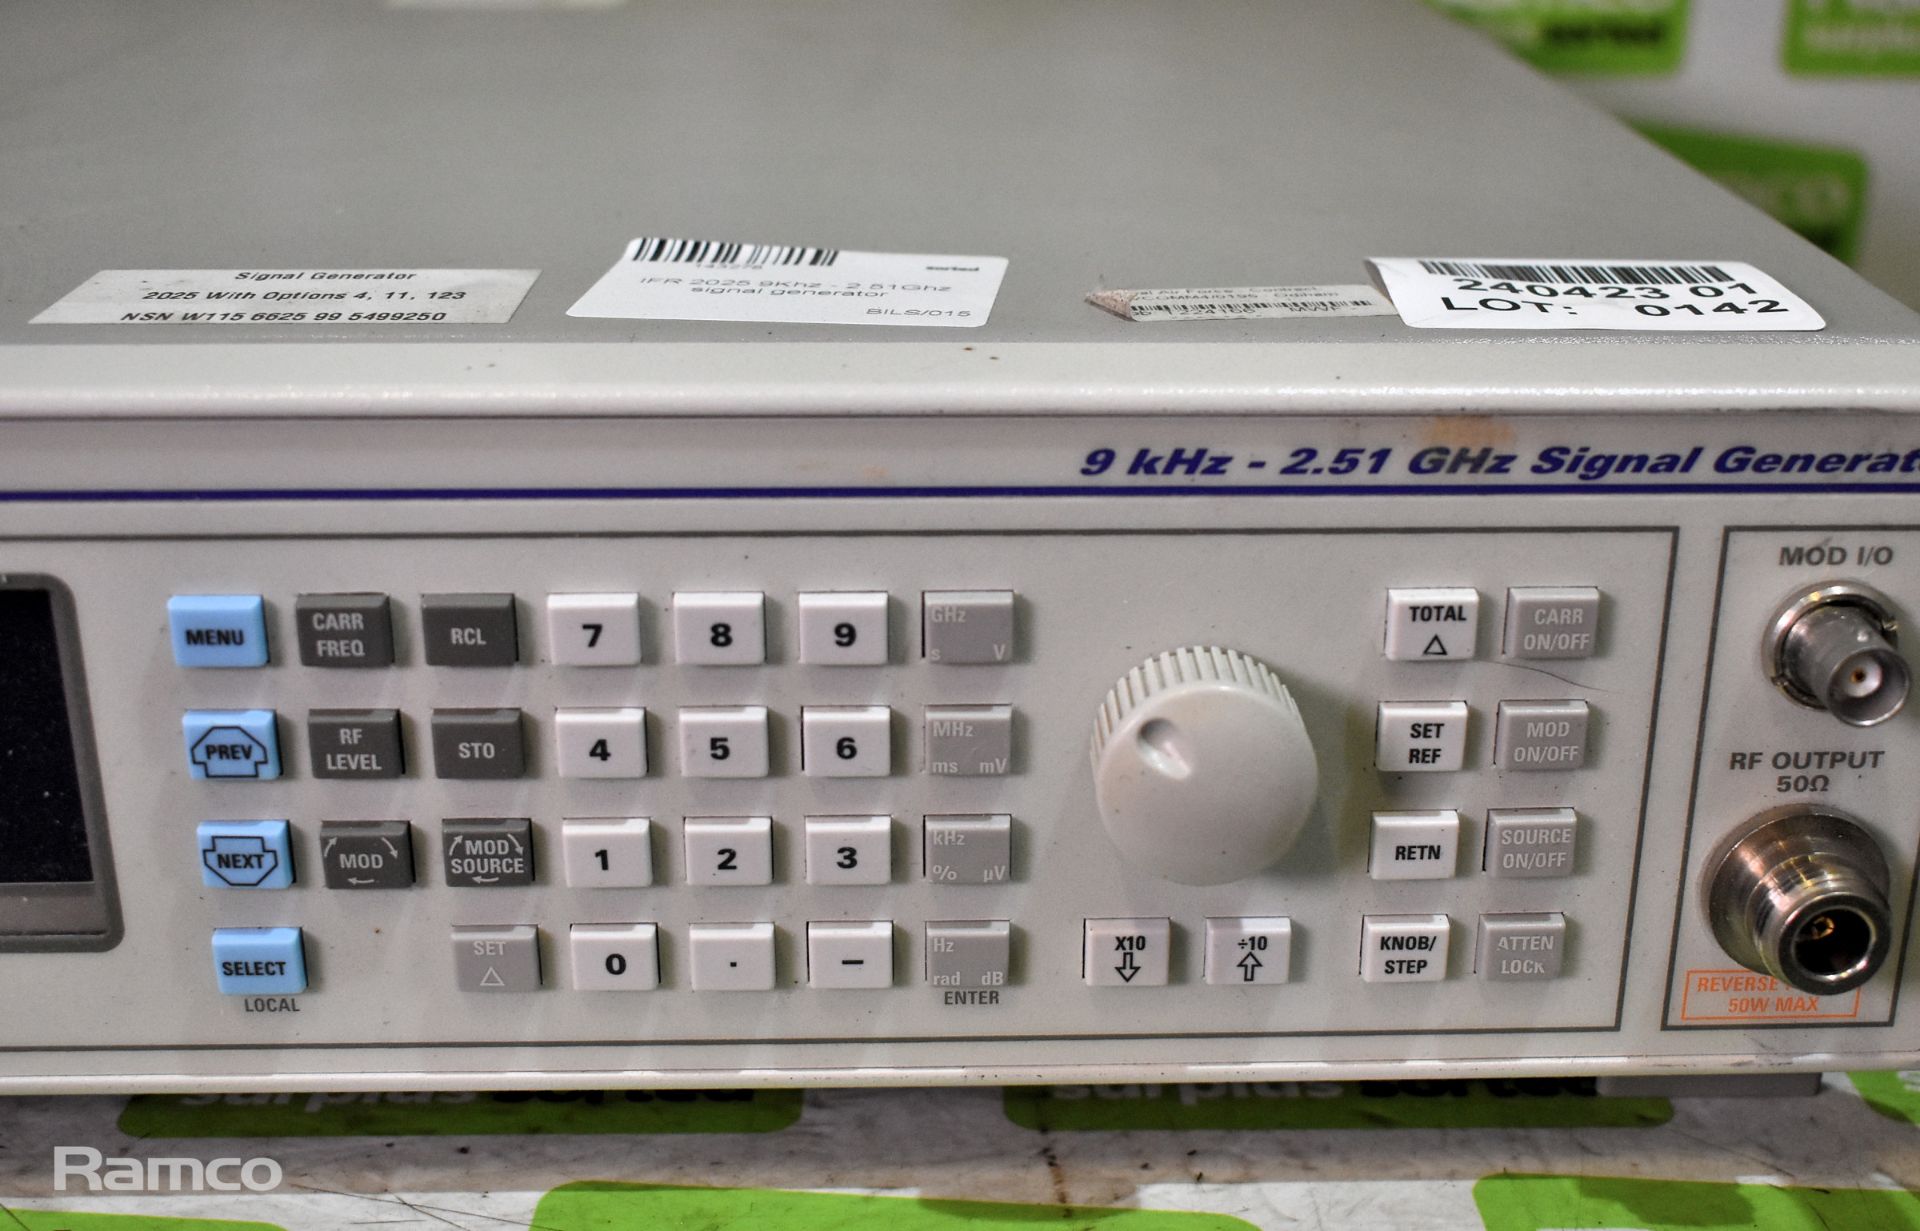 IFR 2025 9KHz - 2.51GHz signal generator - Image 2 of 4